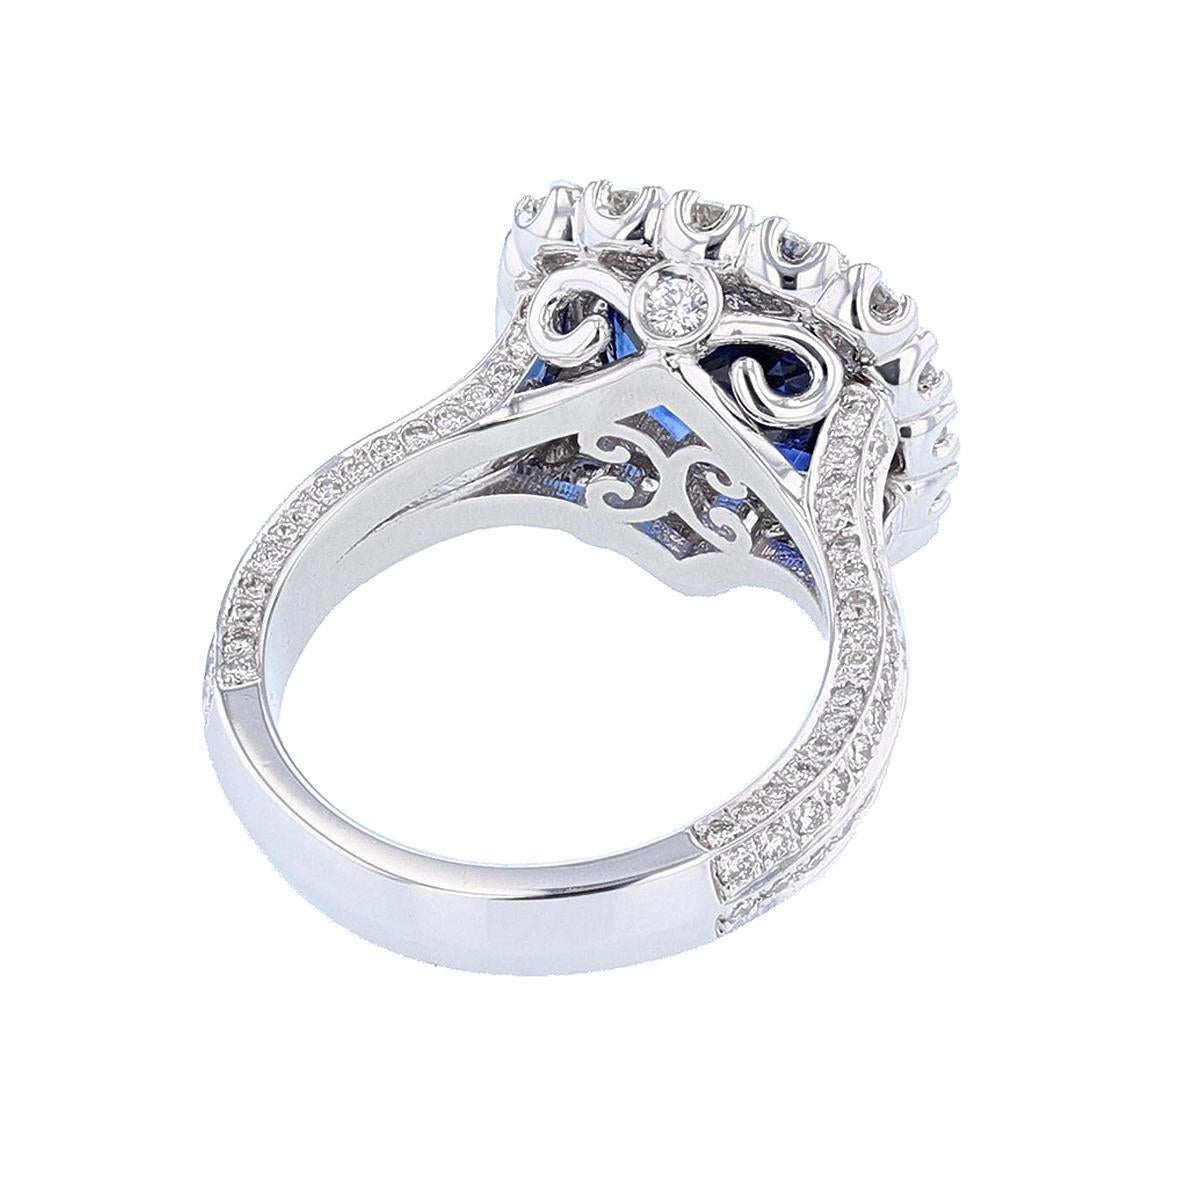 Contemporary Nazarelle 18 Karat White Gold 5.06 Certified Cushion Sapphire and Diamond Ring For Sale